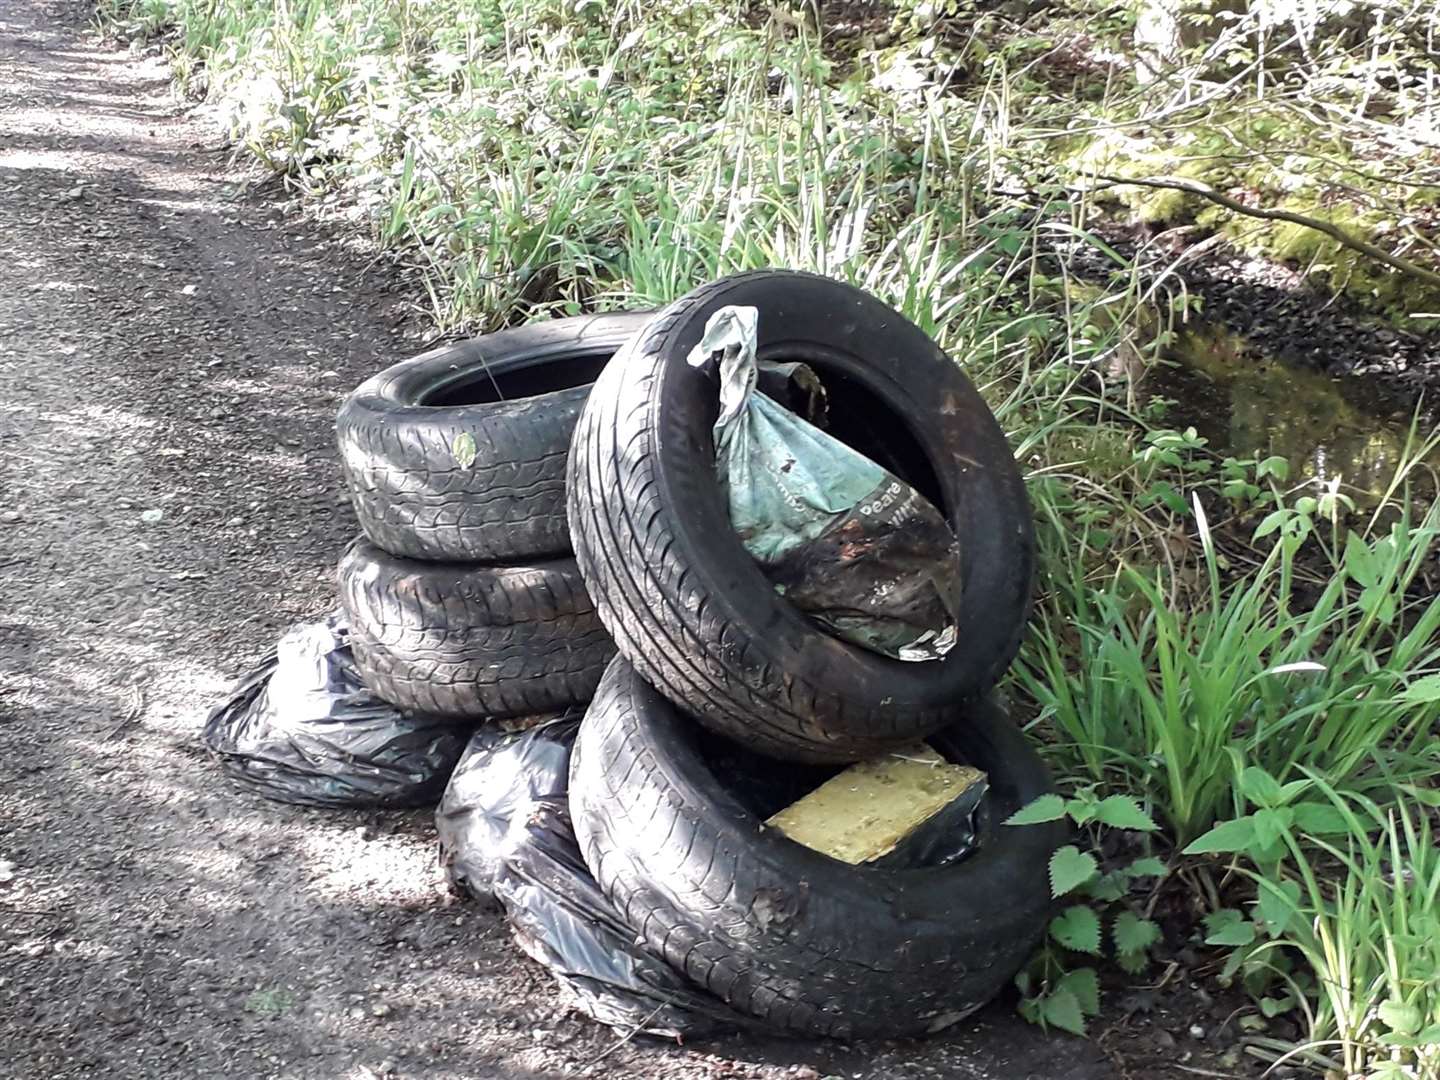 There have been reports of fly-tipping at the woods too